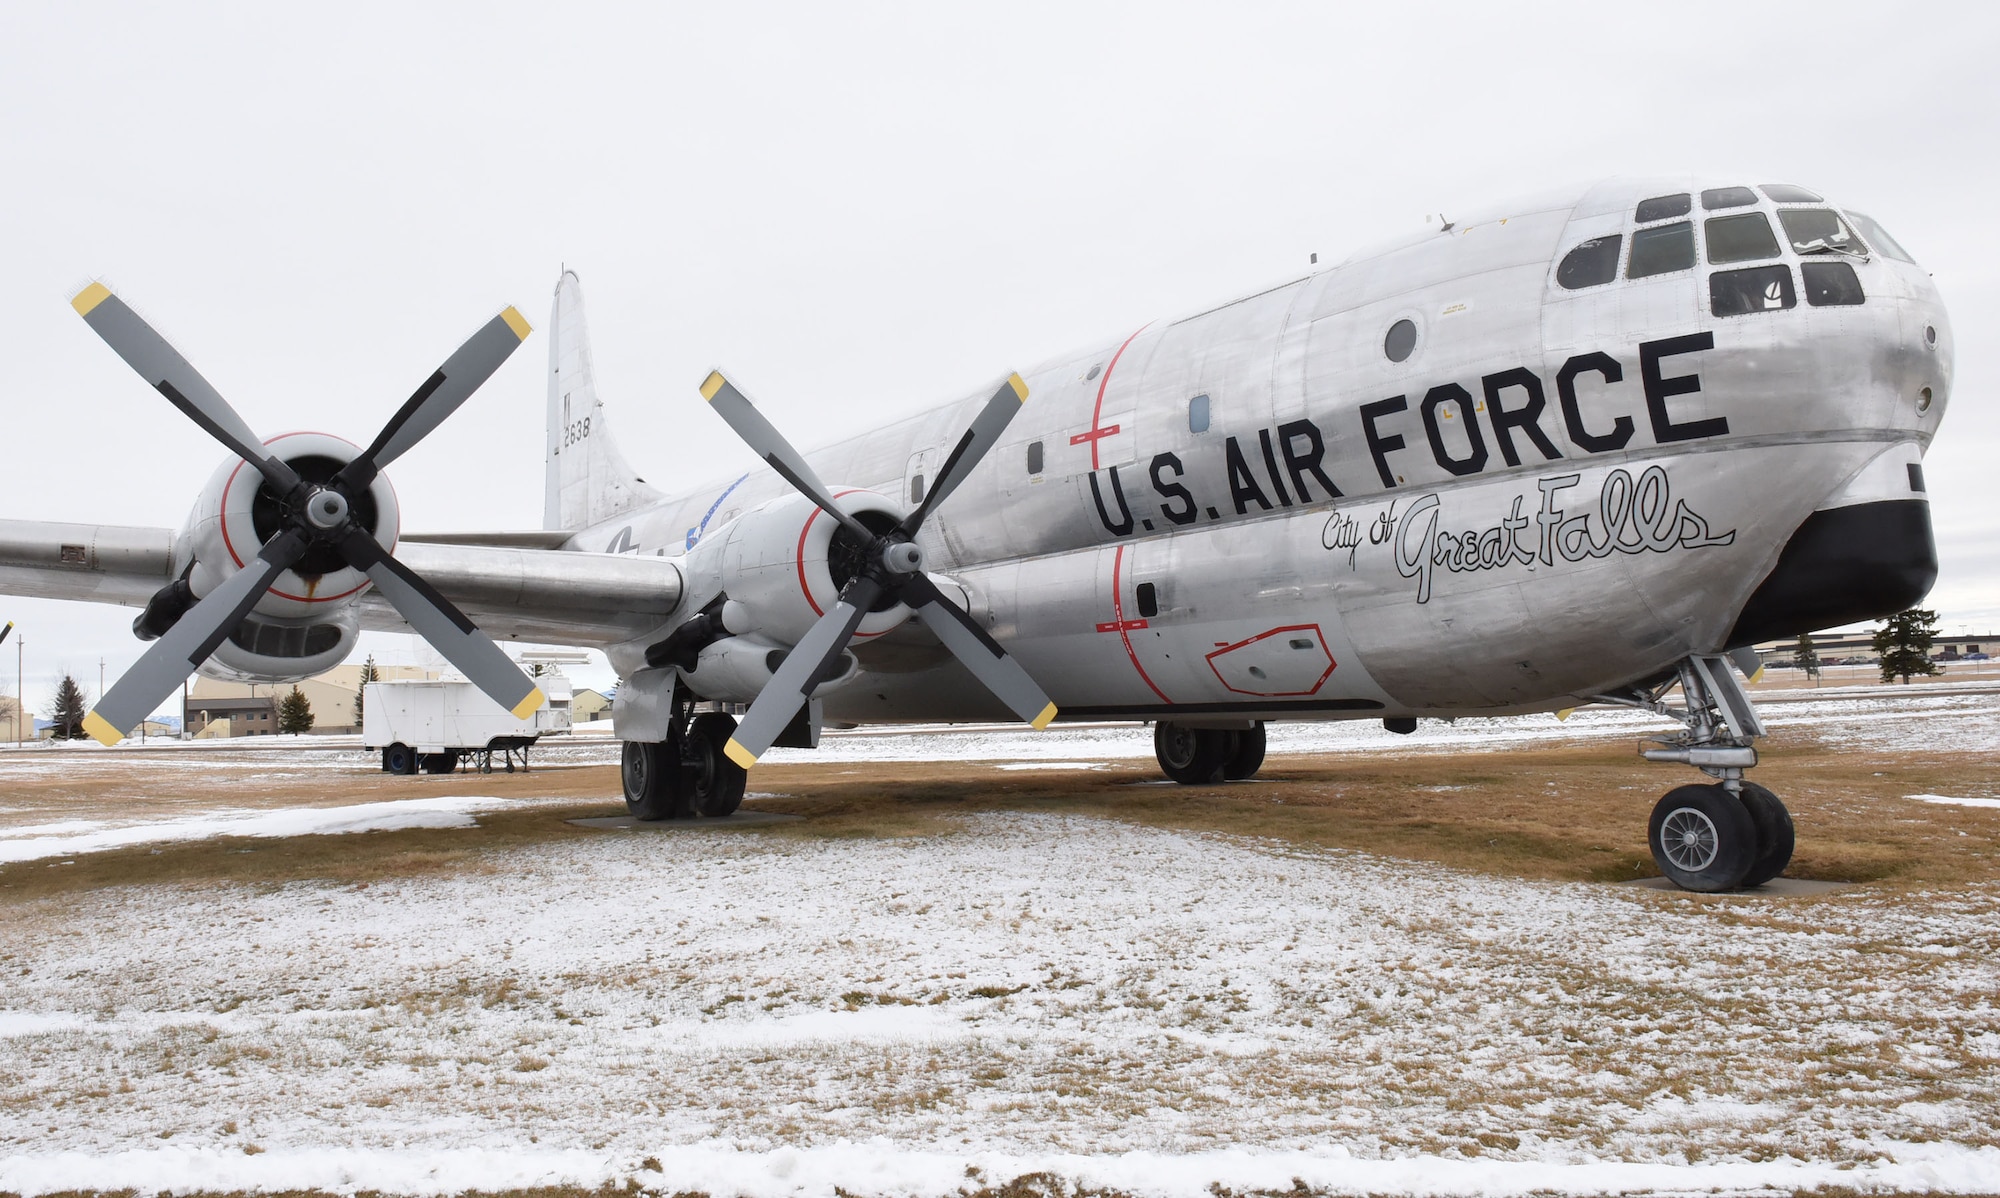 A KC-97G “Stratofreighter”, which flew at Malmstrom Air Force Base, Mont., during the late 1950s to early 1960s, is one of seven aircraft on display at the Malmstrom Historic Exhibit and Air Park.  The museum contains more than 400 items on display that depict the history of Malmstrom and the Minuteman missile program.  (Air Force photo/Jason Heavner)